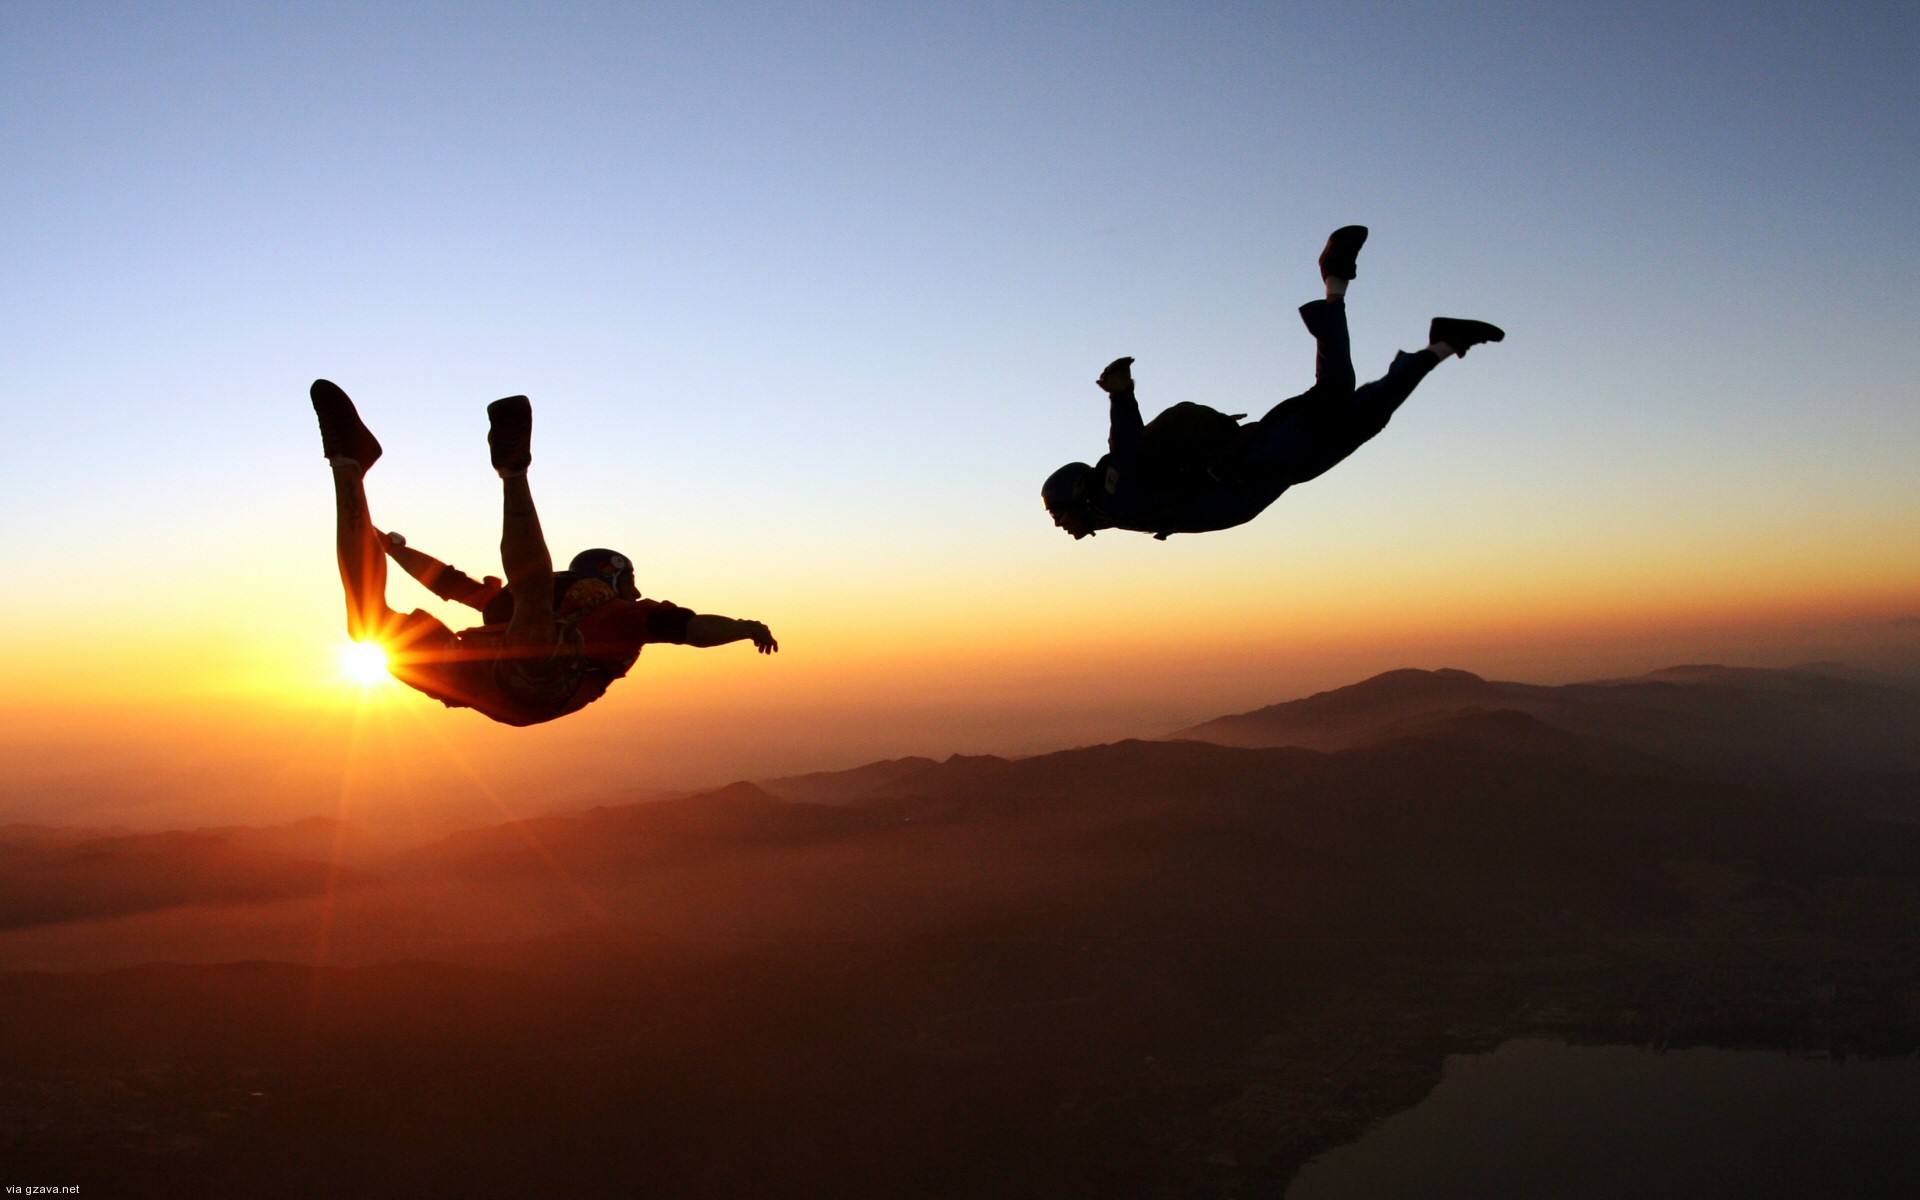 Skydiving Backgrounds, Compatible - PC, Mobile, Gadgets| 1920x1200 px